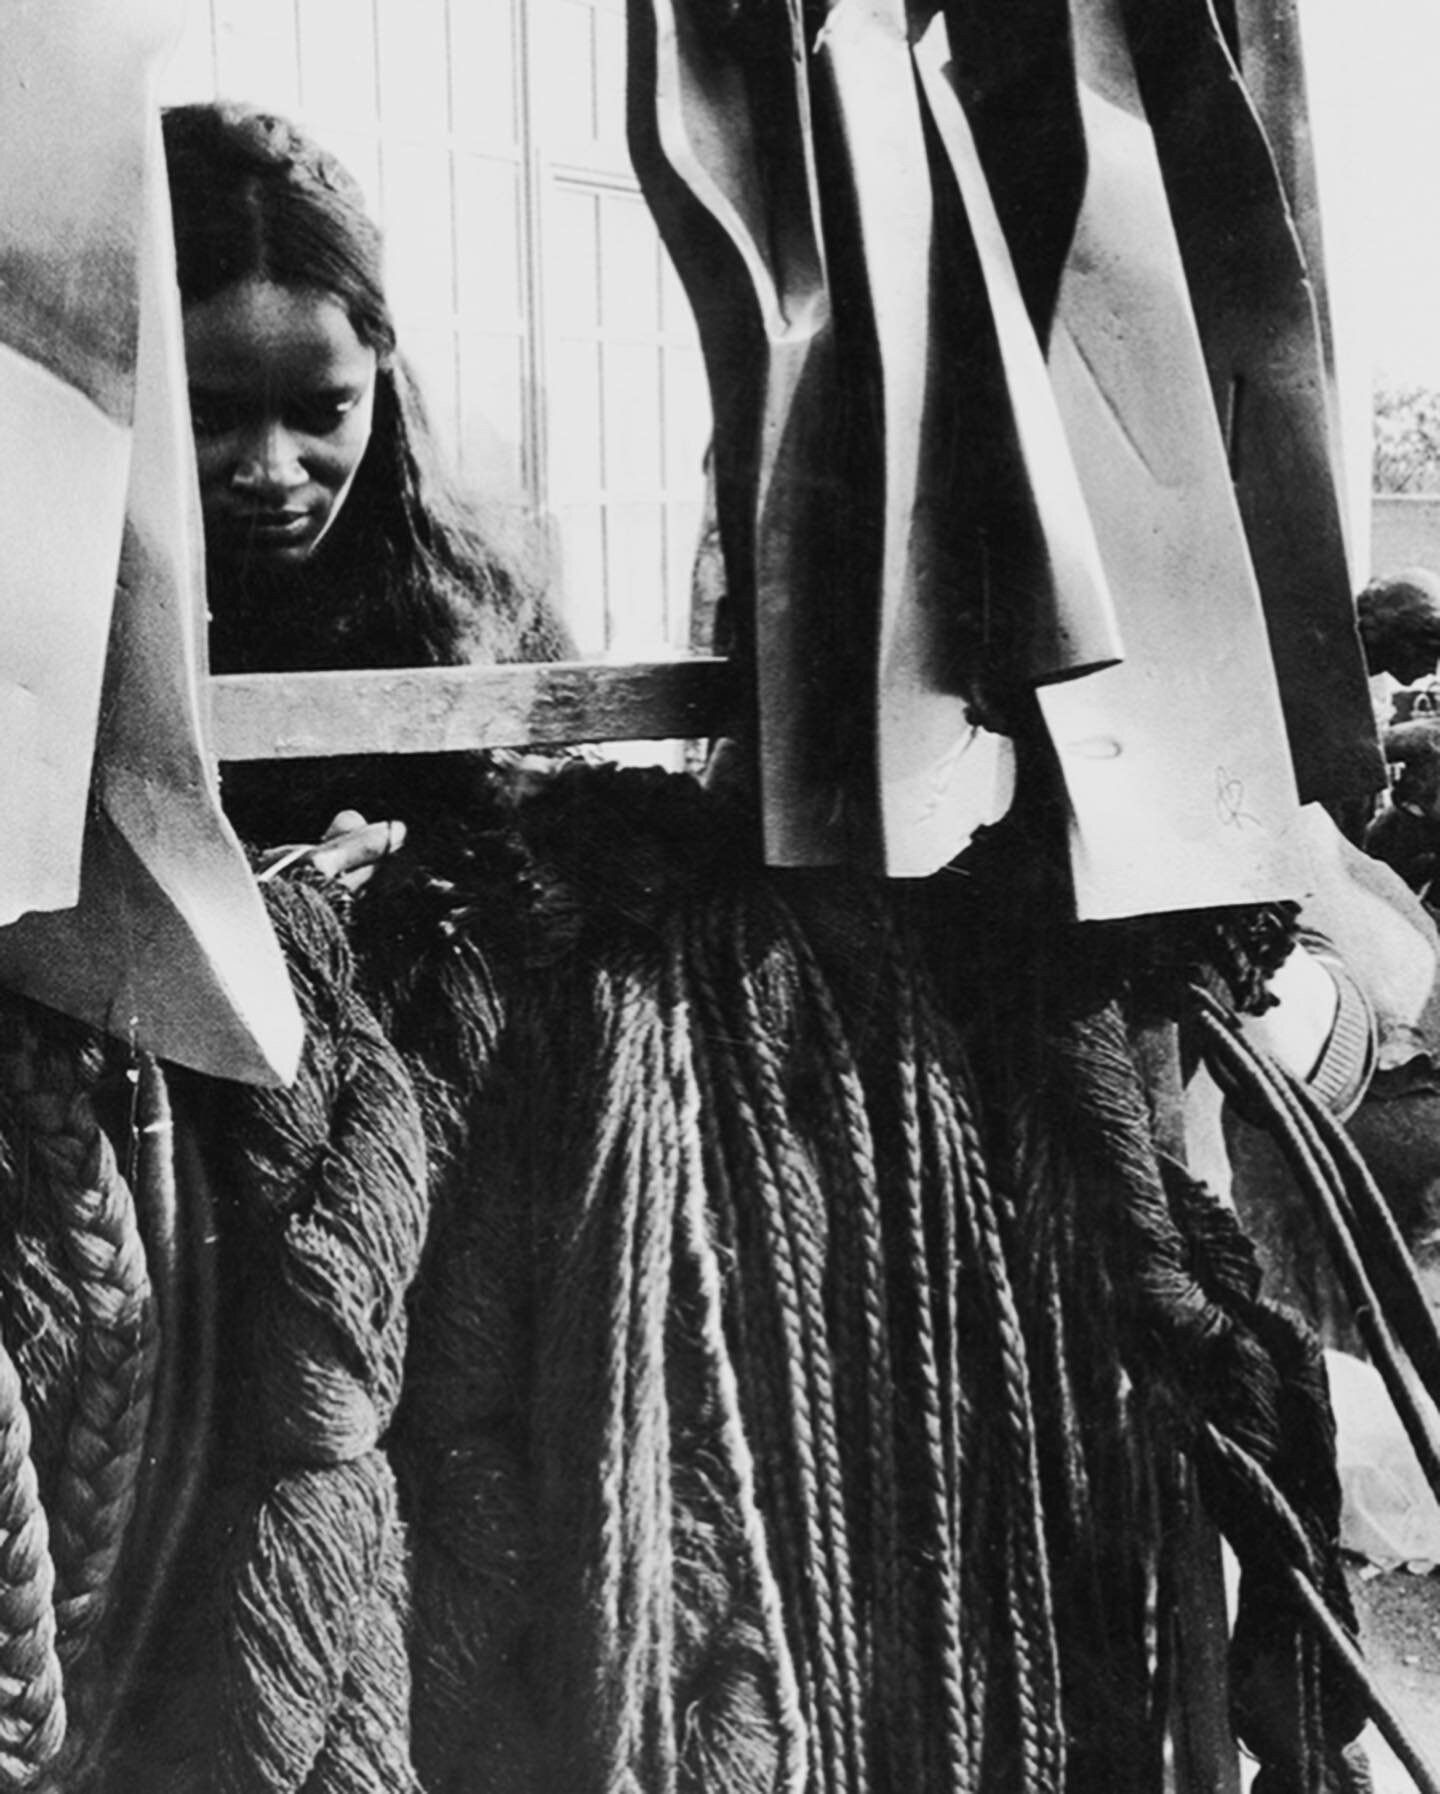 Barbara Chase-Riboud&rsquo;s Confessions for Myself, 1972. I first heard of, and saw, Barbara Chase-Riboud&rsquo;s work in 2017 as part of the show We Wanted a Revolution: Black Radical Women, 1965&ndash;85 #wewantedarevolution at the @brooklynmuseum